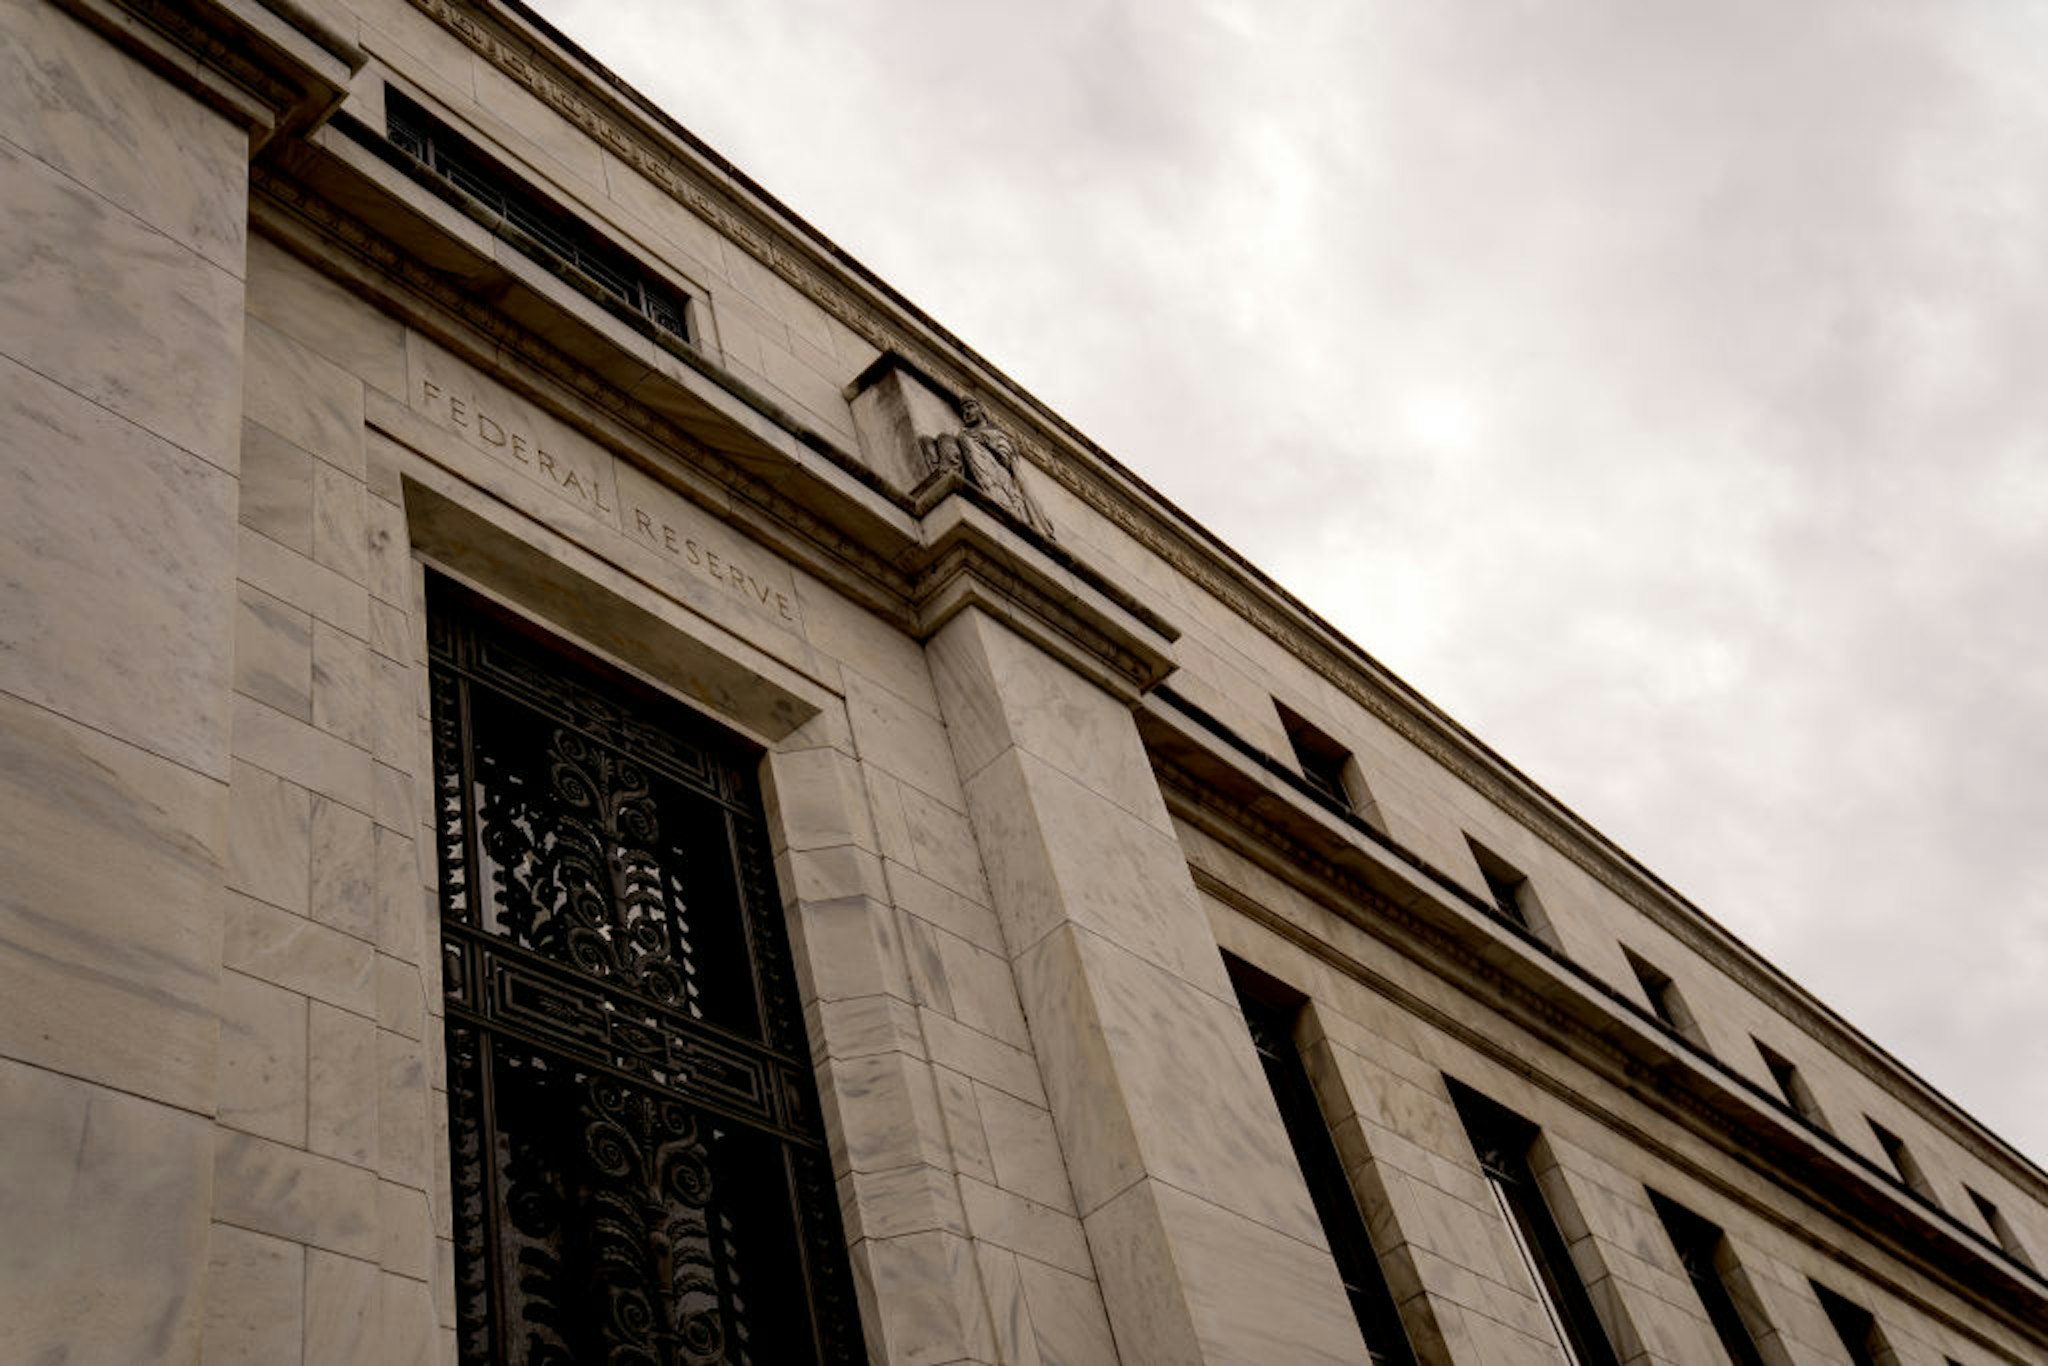 The Marriner S. Eccles Federal Reserve building in Washington, D.C., U.S., on Monday, May 3, 2021. President Biden's $4 trillion vision of remaking the federal government's role in the U.S. economy is now in the hands of Congress, where both parties see a higher chance of at least some compromise than for the administrations pandemic-relief bill. Photographer: Stefani Reynolds/Bloomberg via Getty Images